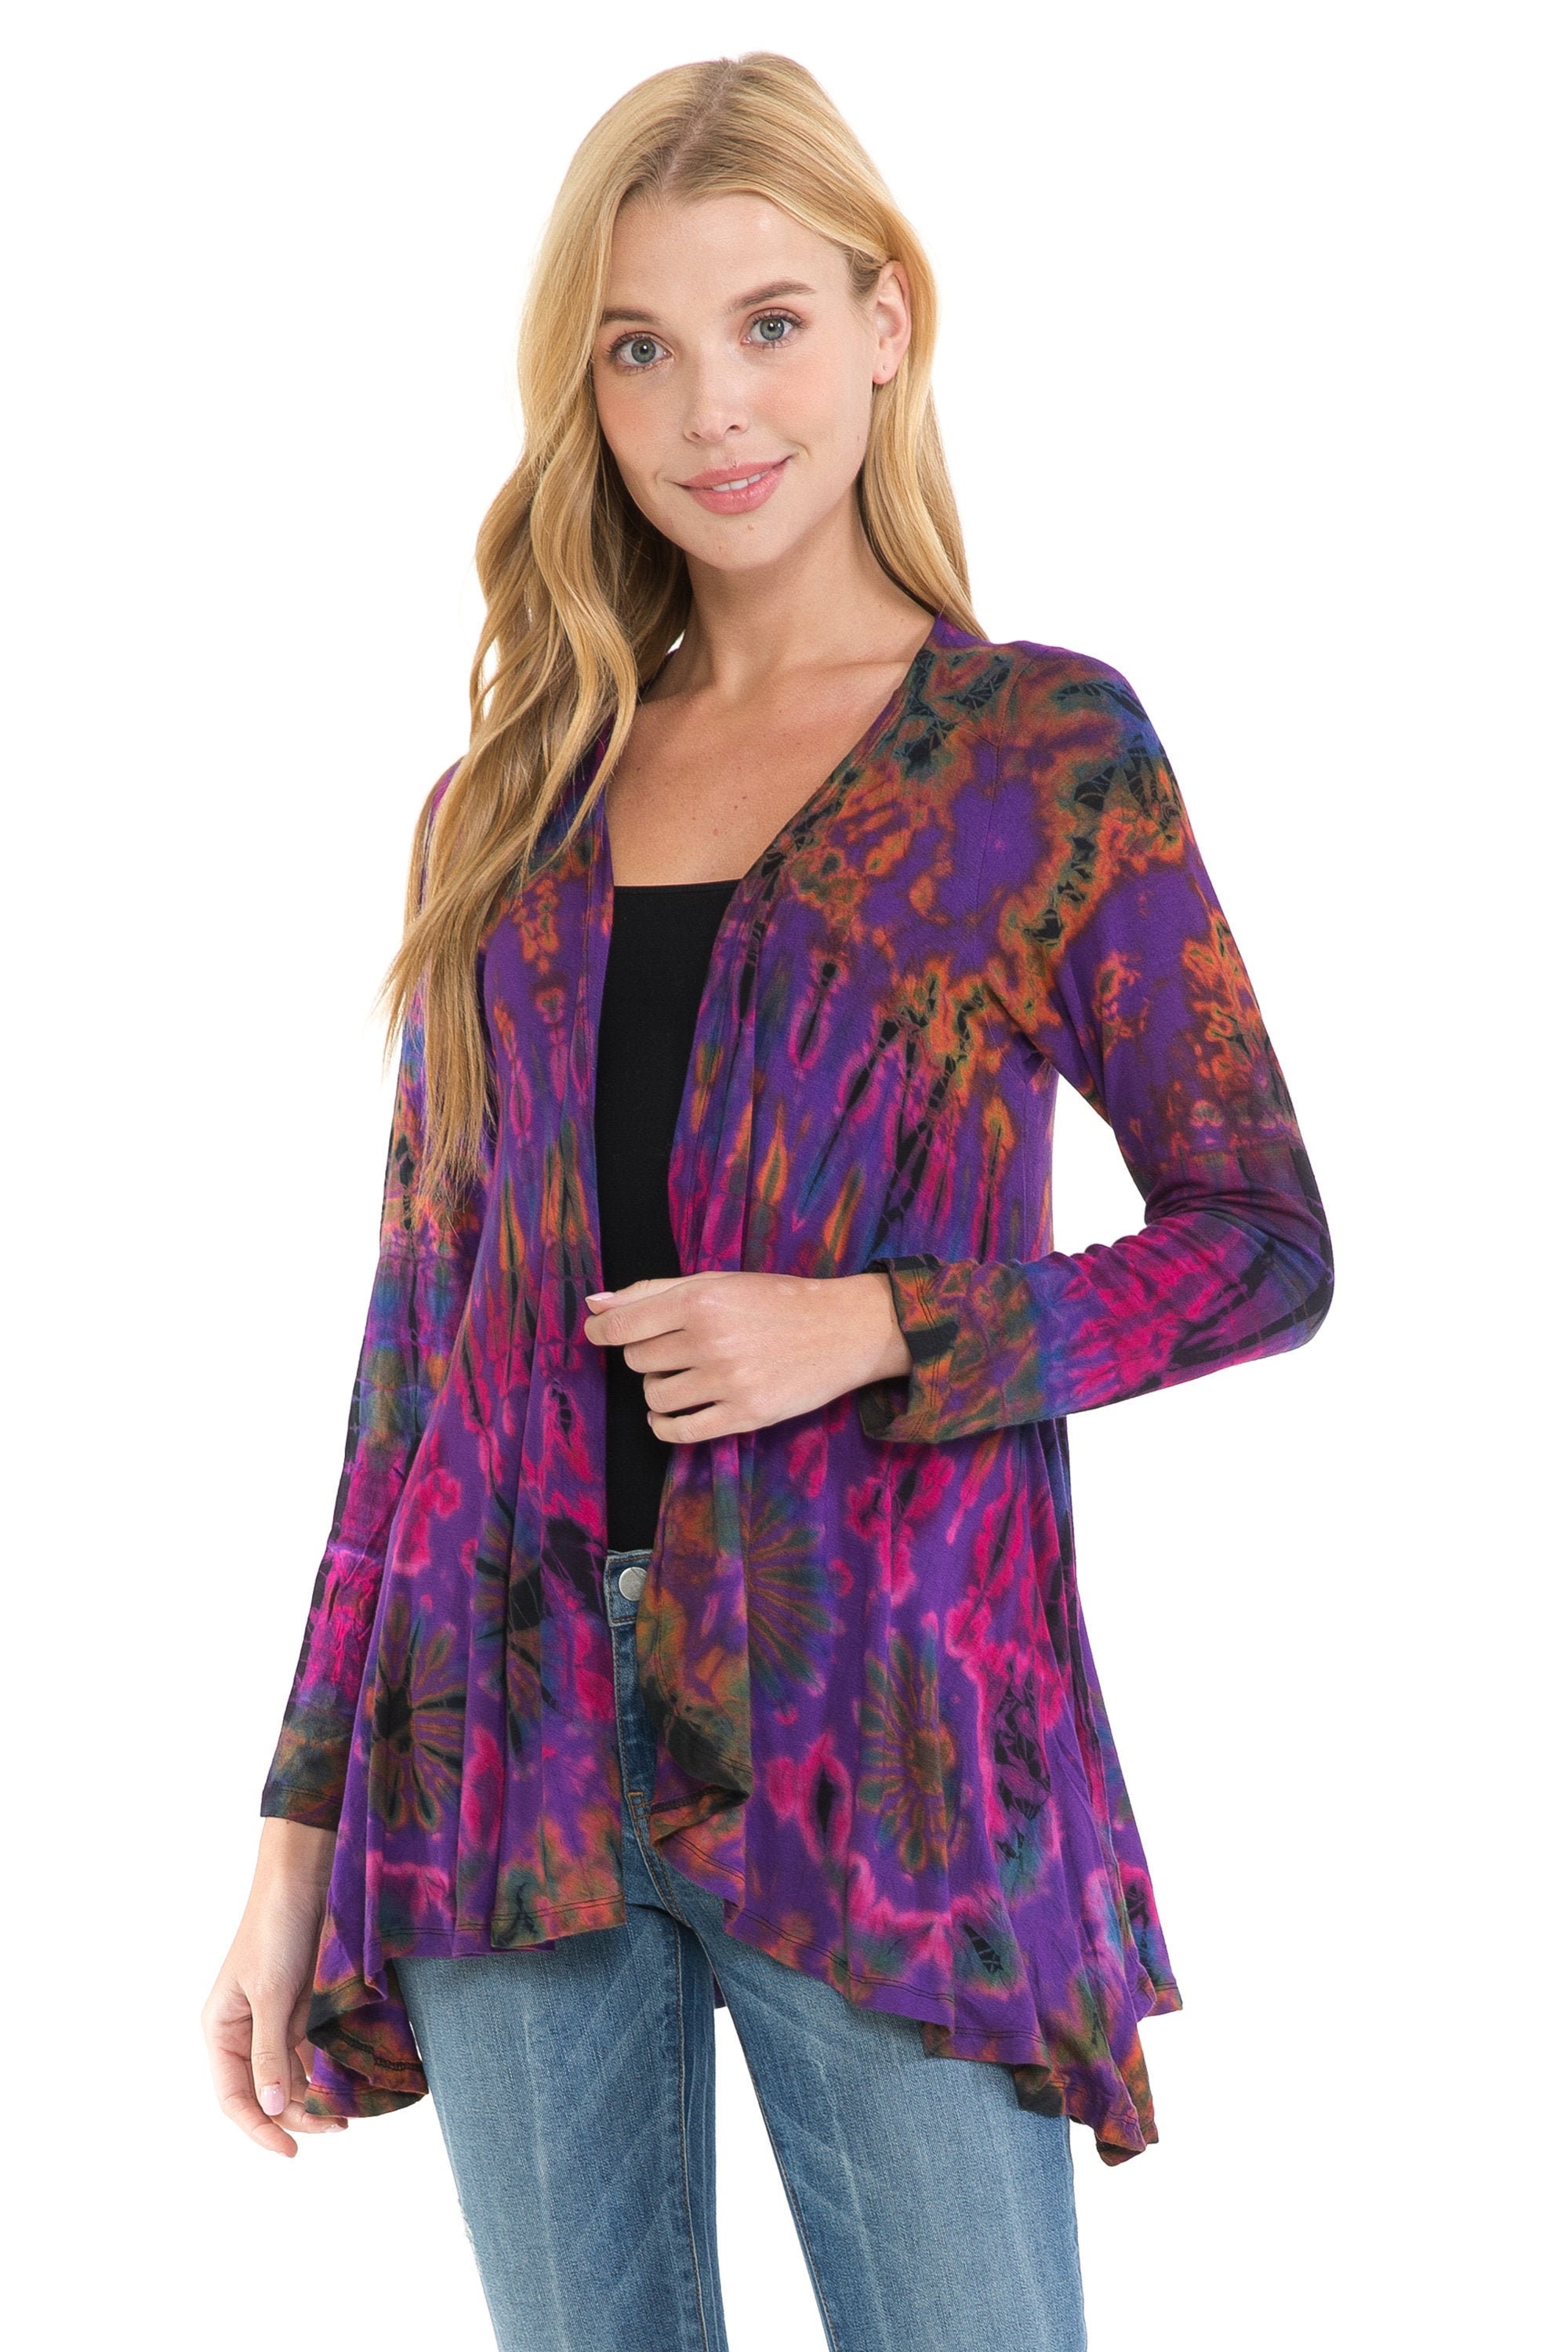 Mudmee Purple Tie Dye Cardigan for Women Soft and Comfortable - Etsy UK